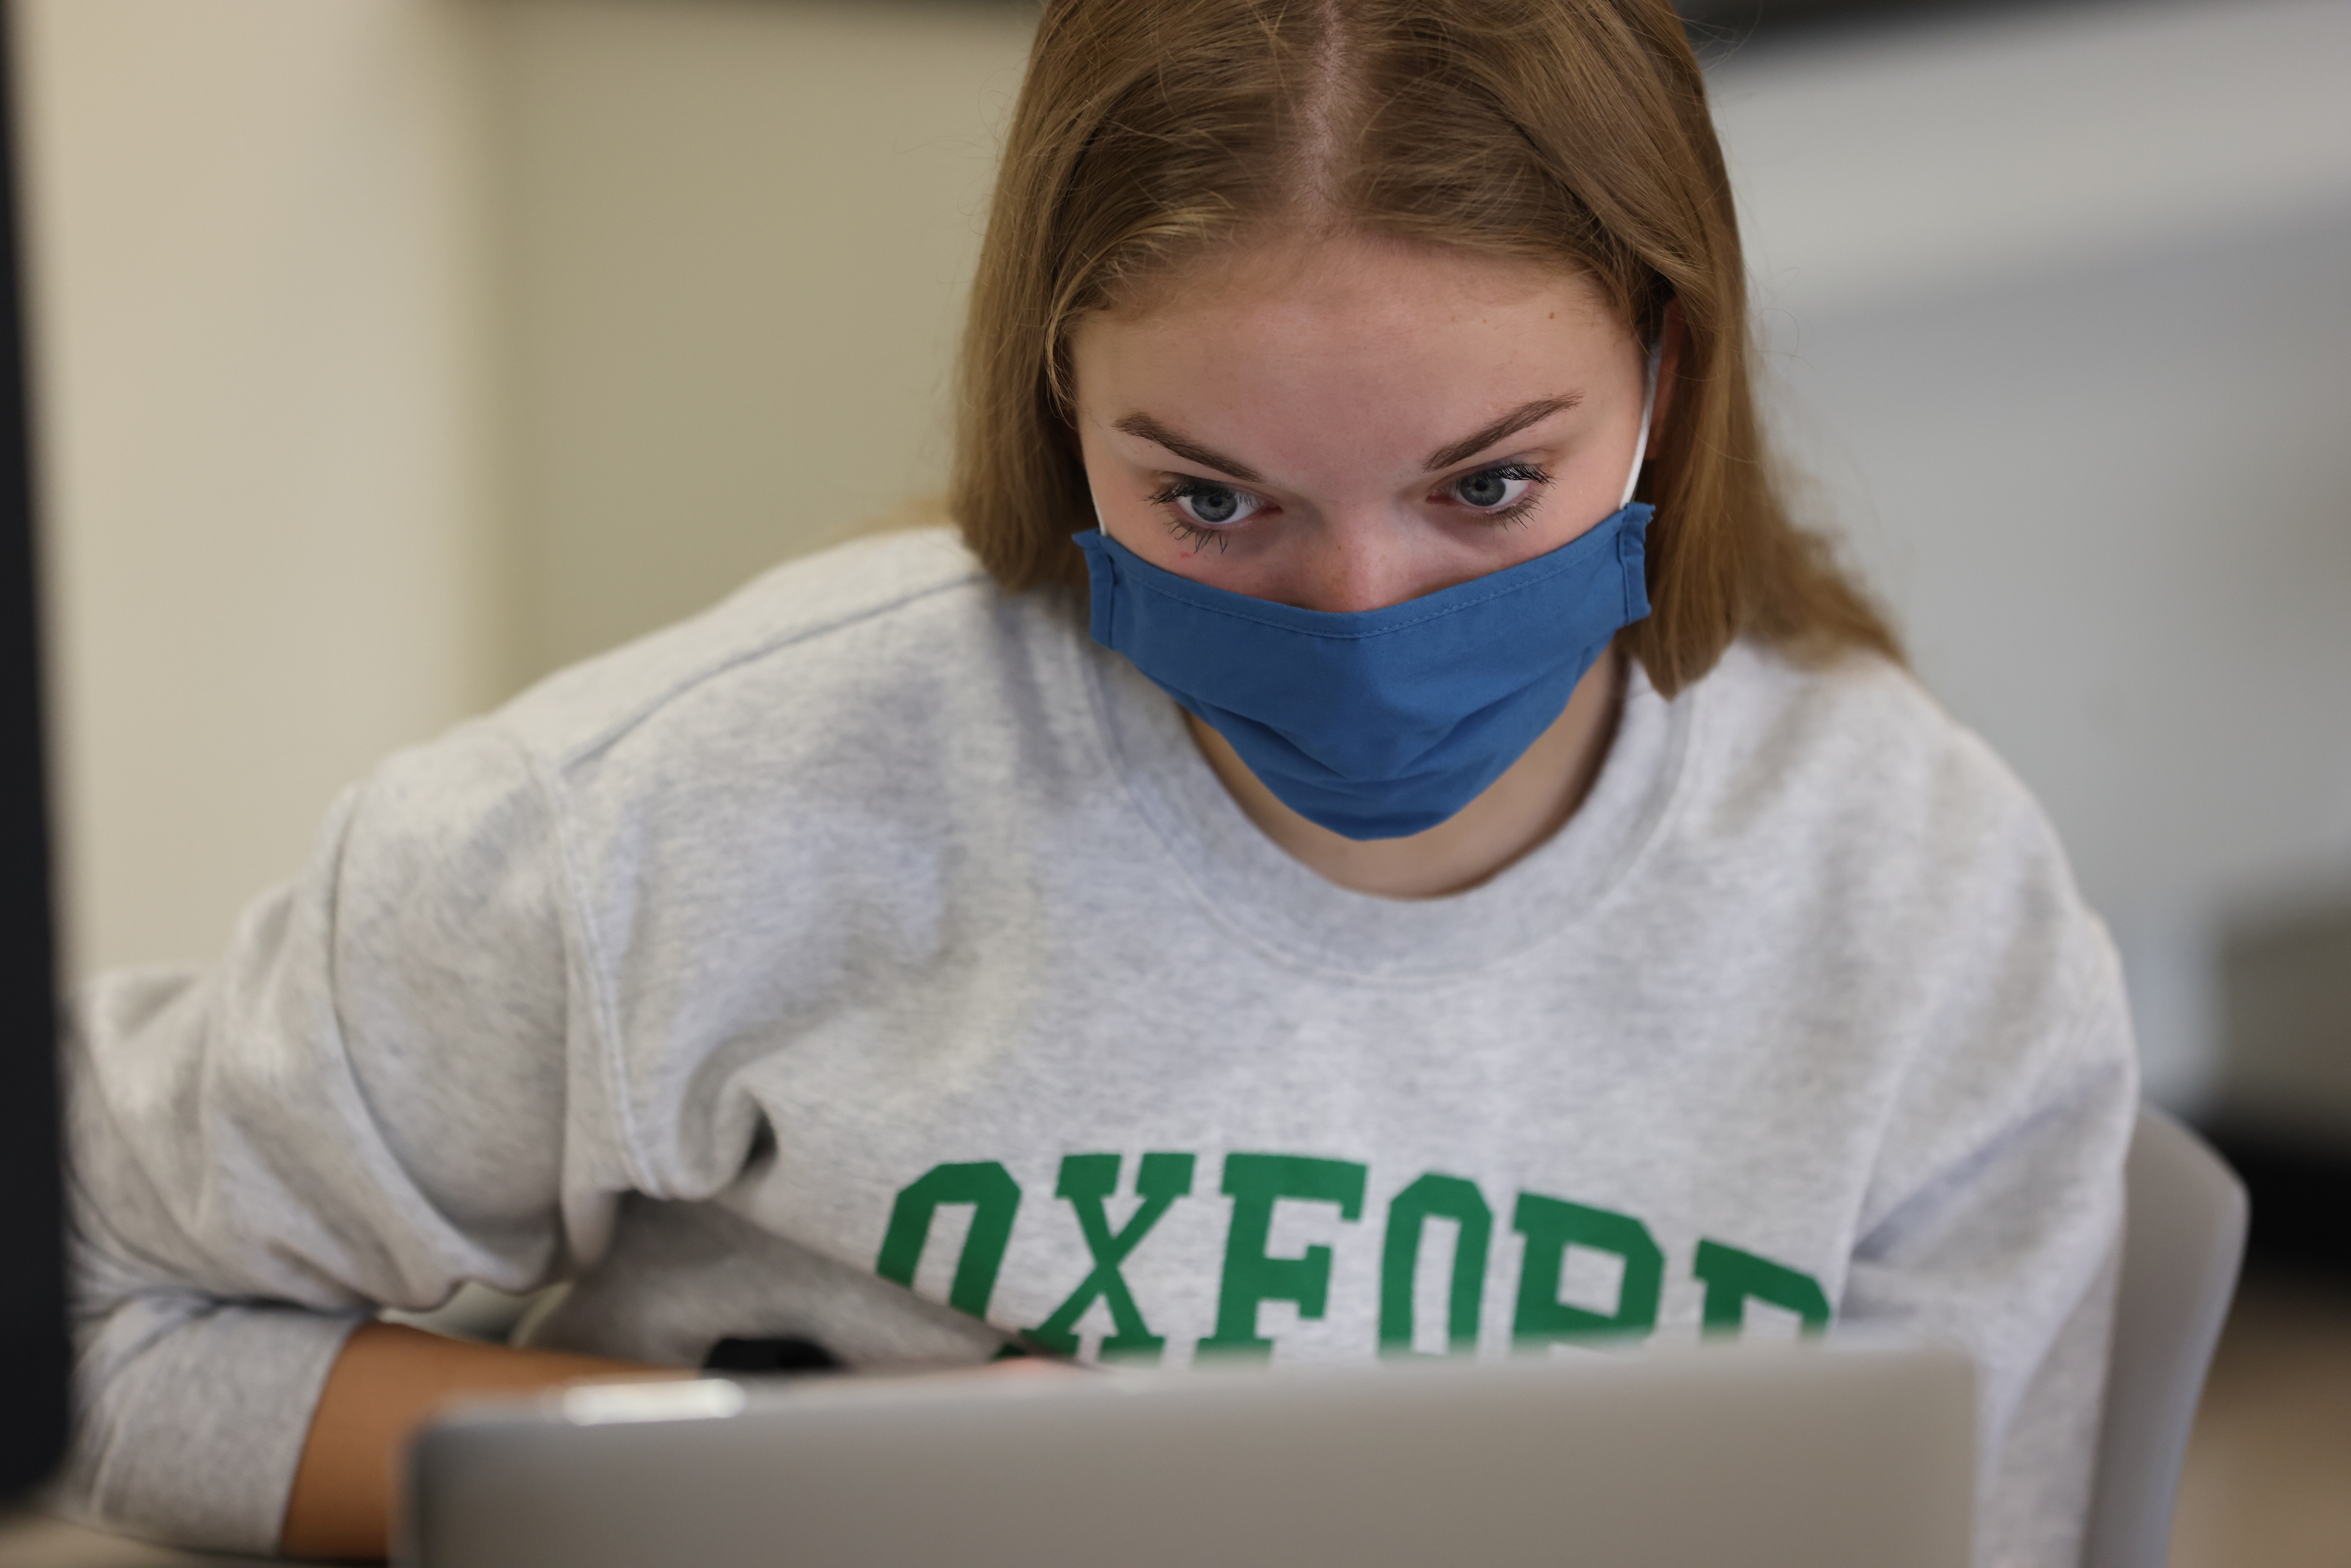 Student wearing a mask using her laptop in class